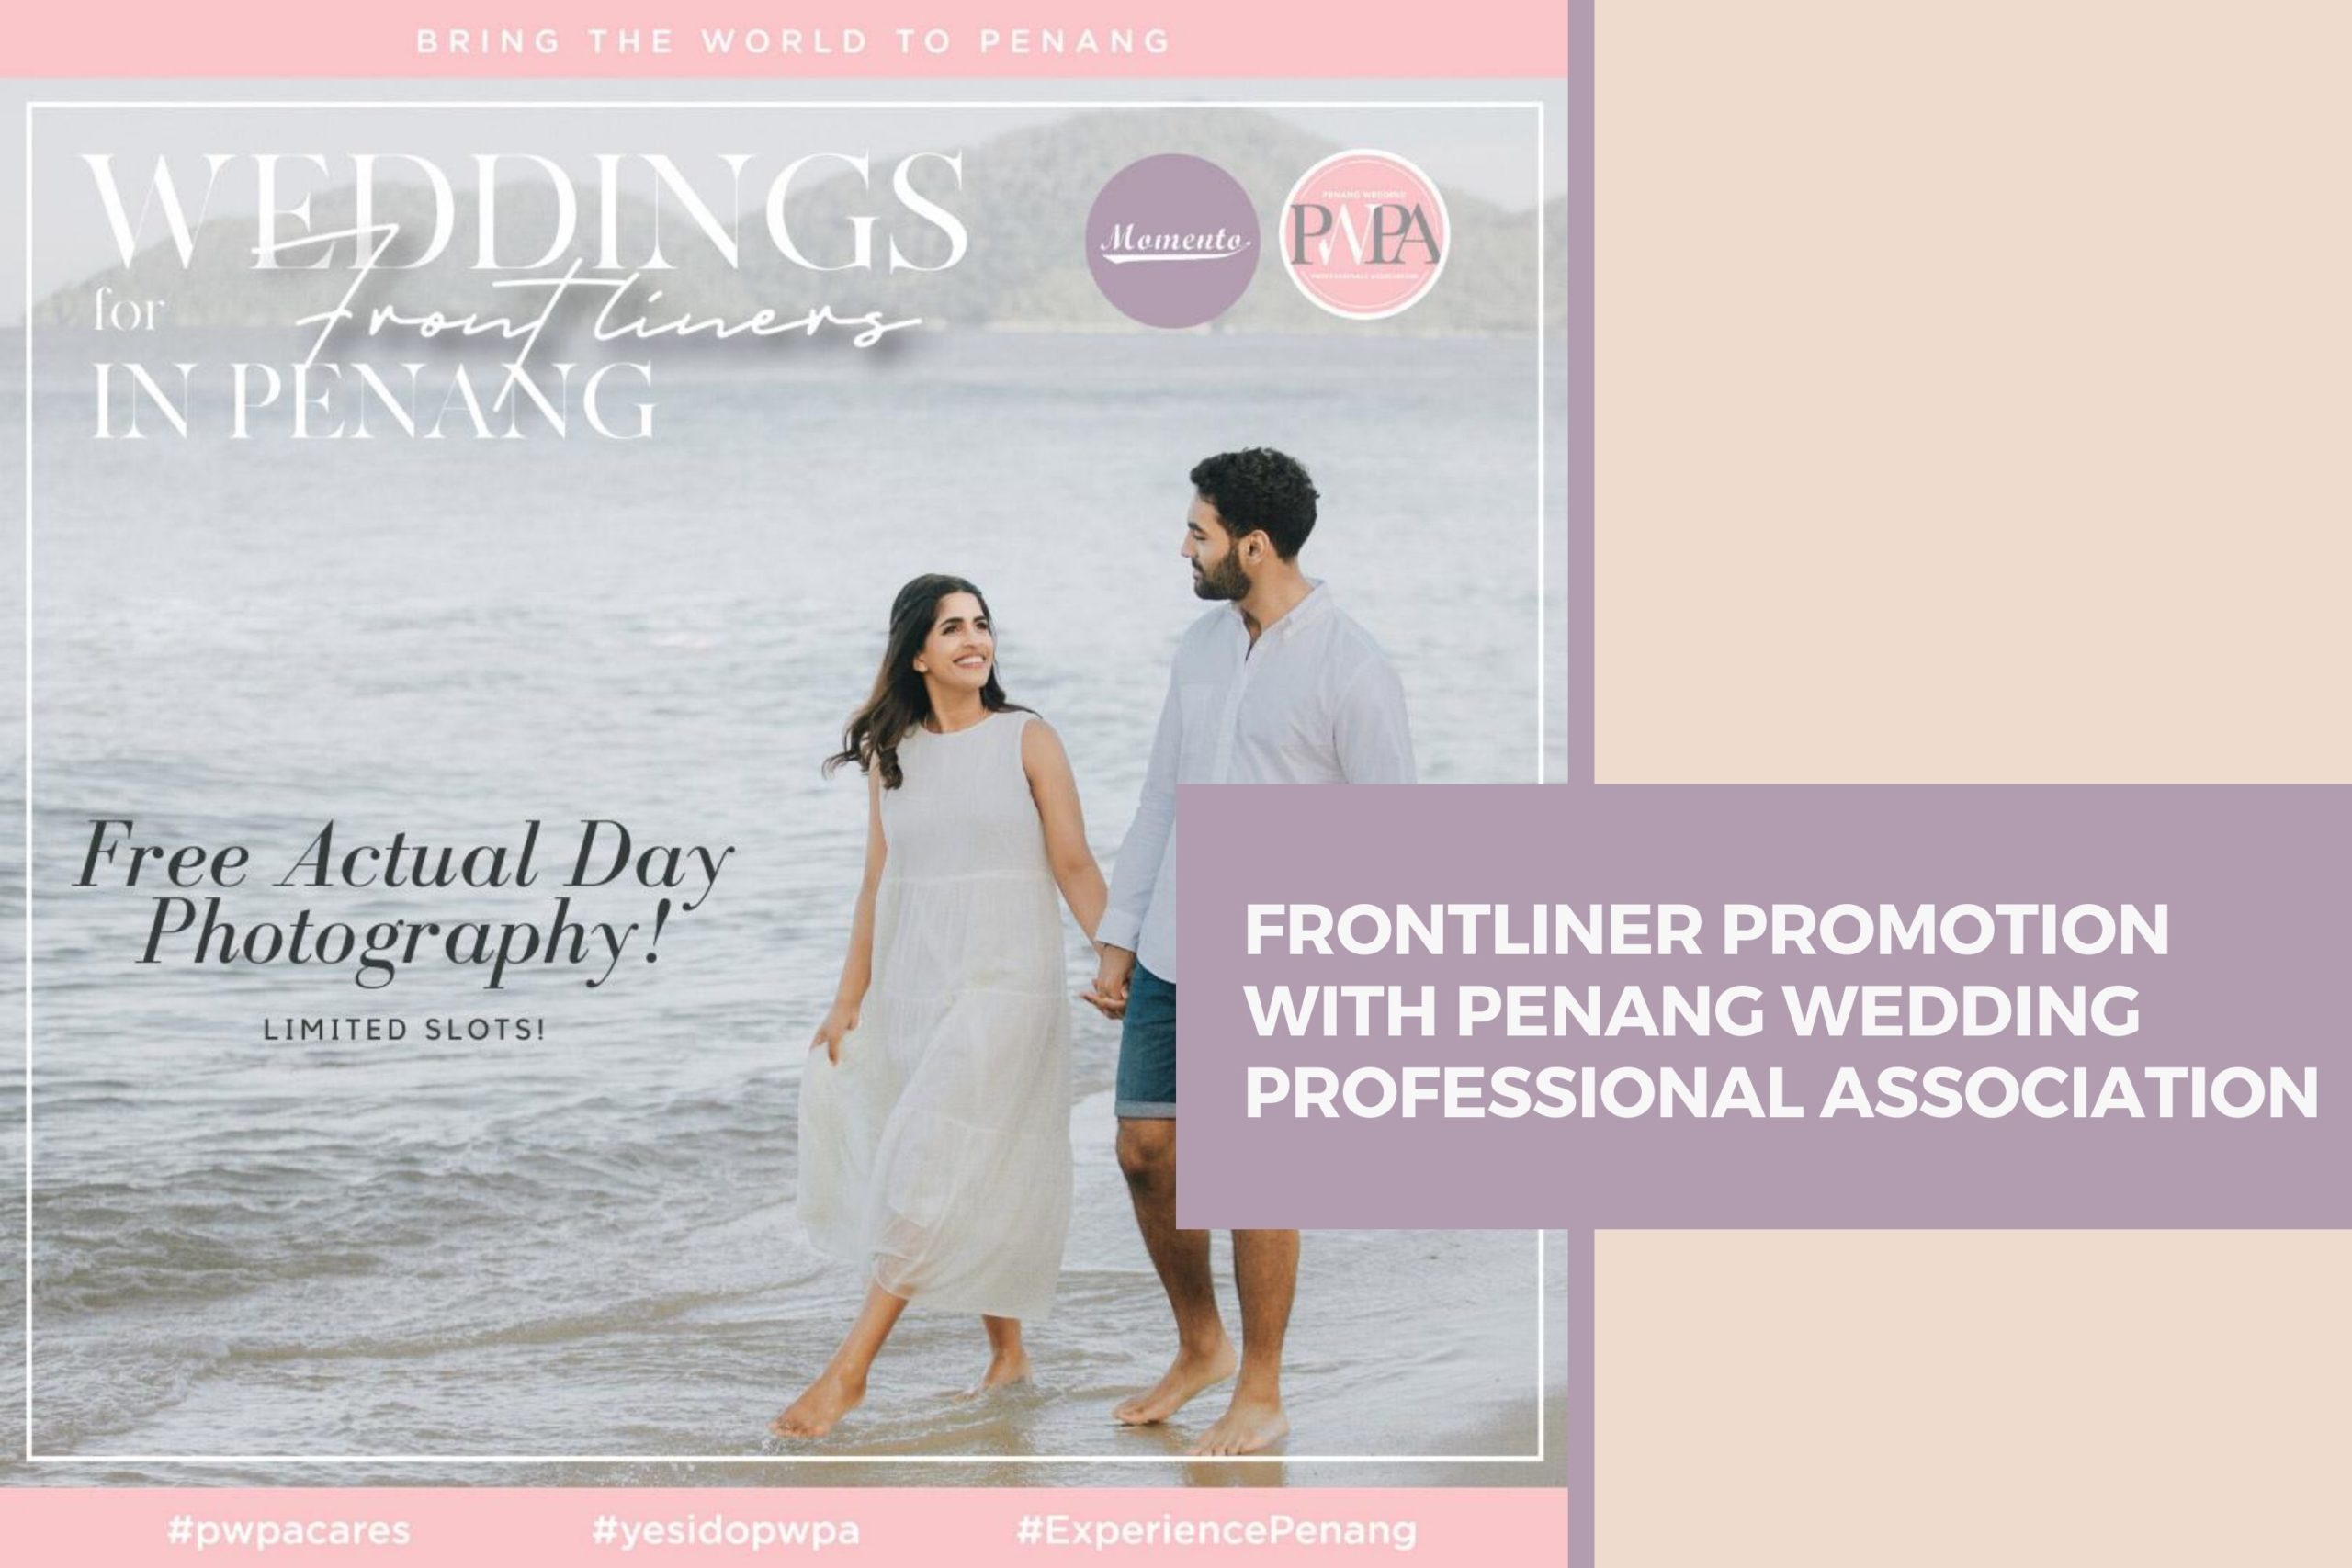 Frontliner Promotion with Penang Wedding Professionals Association